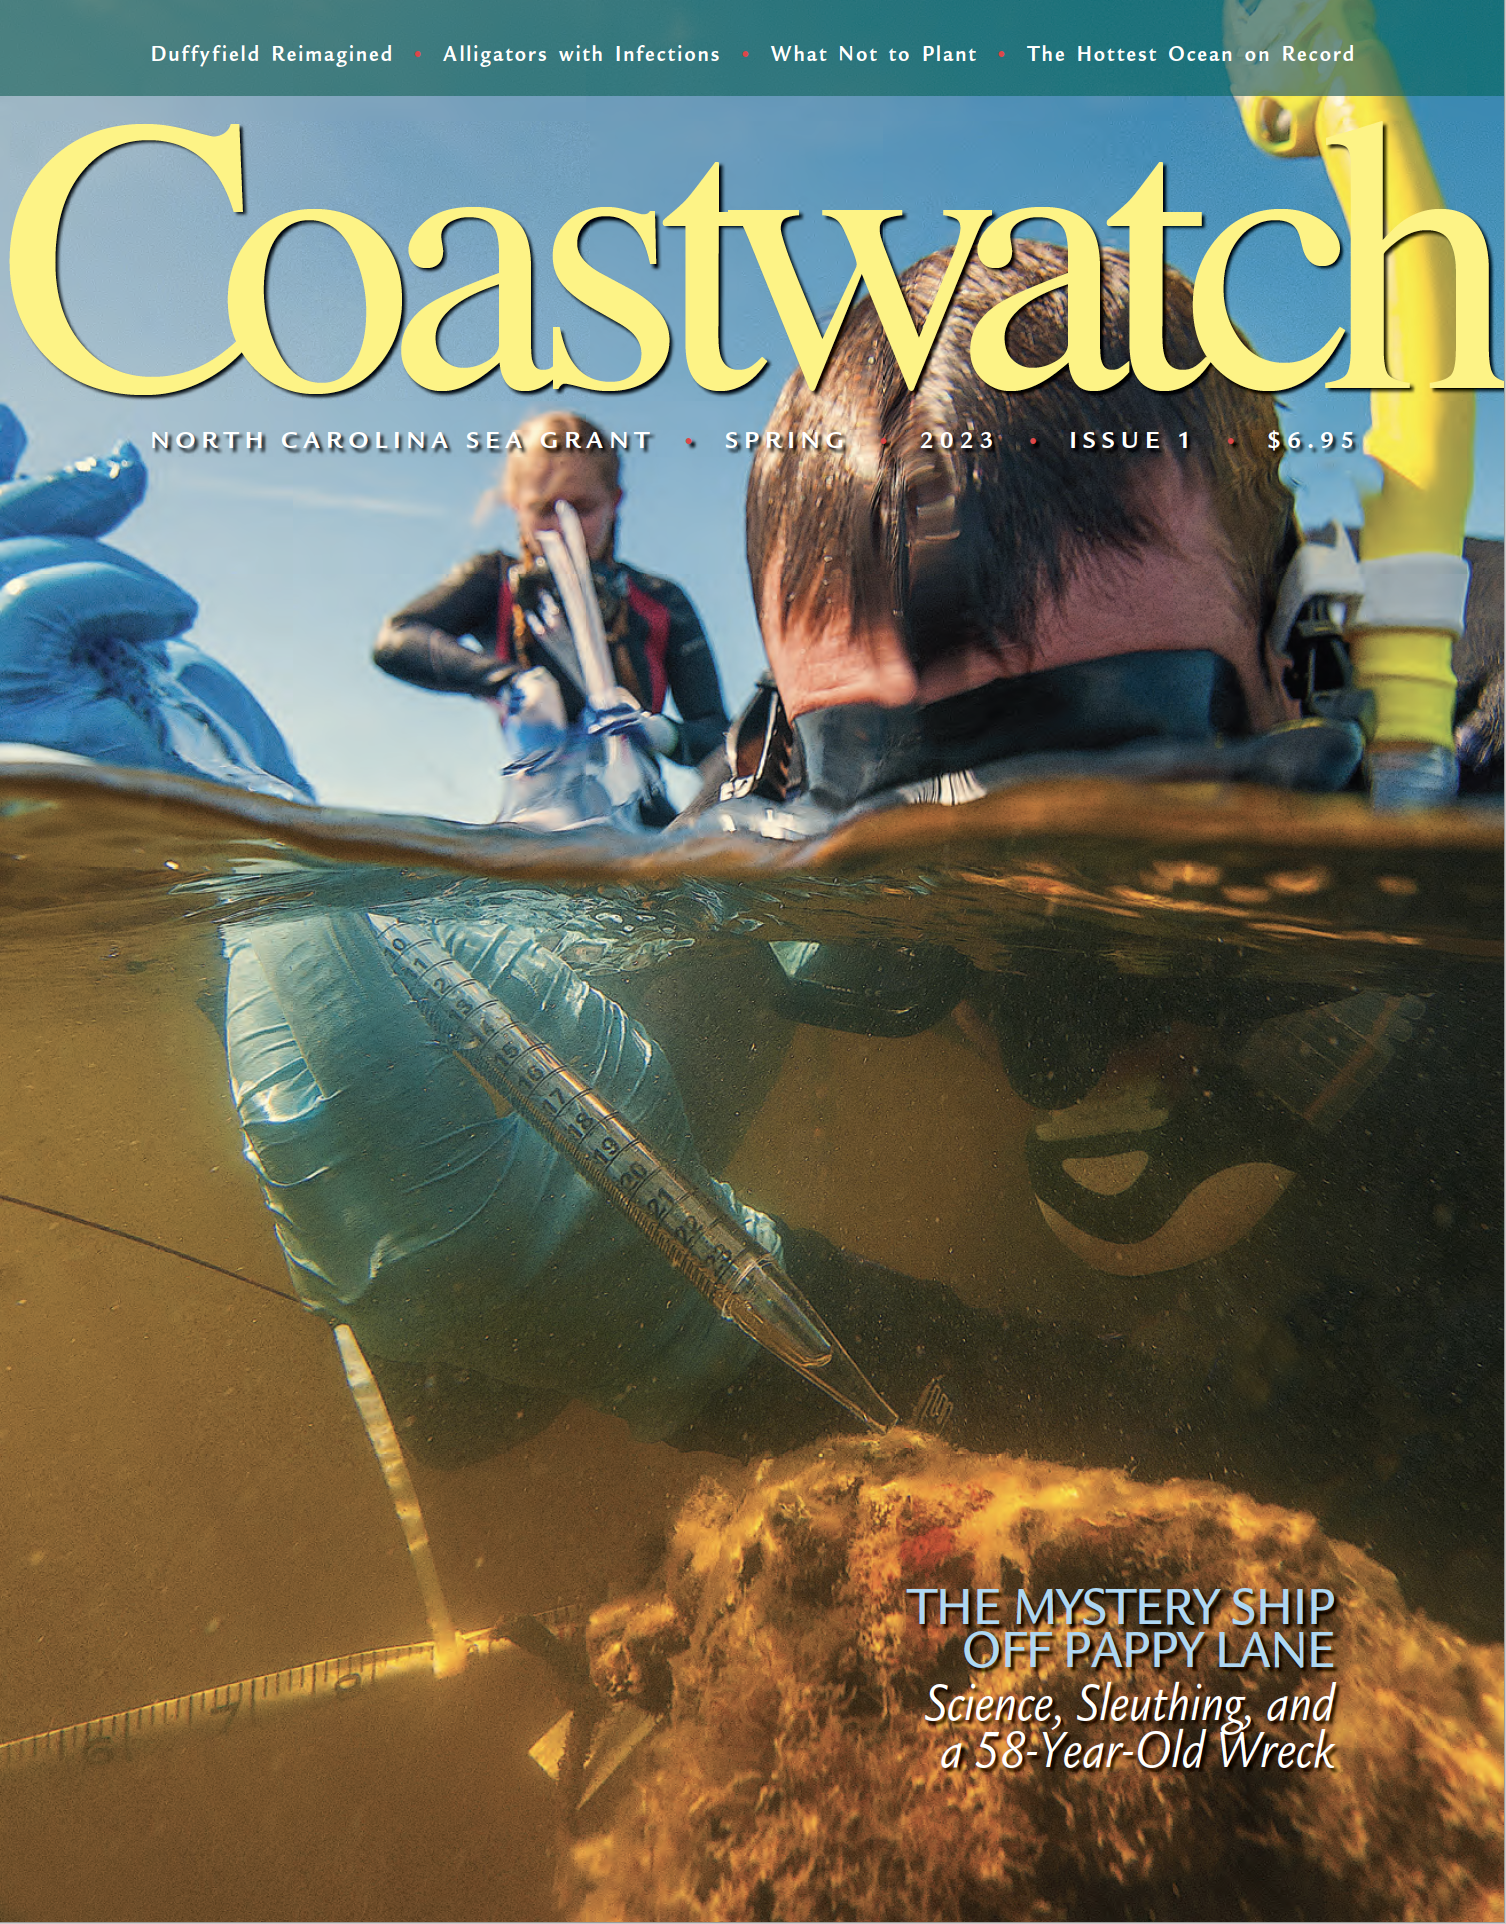 image: COASTWATCH SPRING 2023 cover.